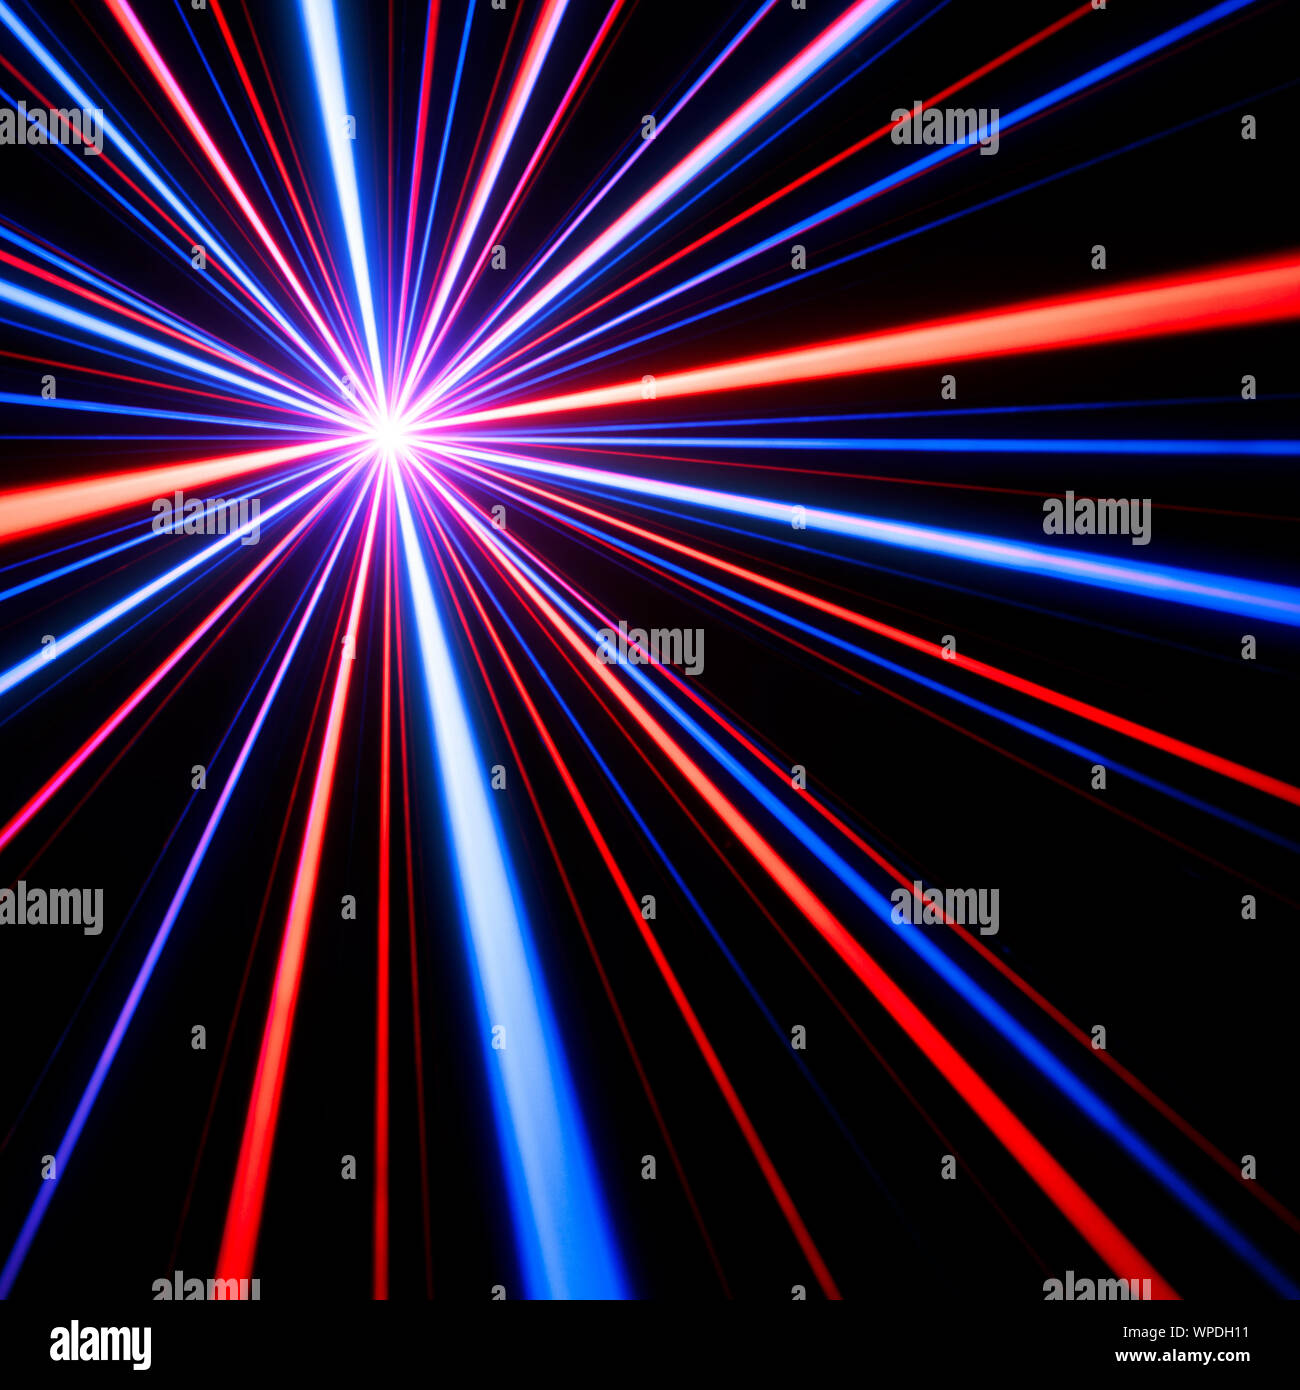 Blue and red laser beam light effects on black background Stock Photo